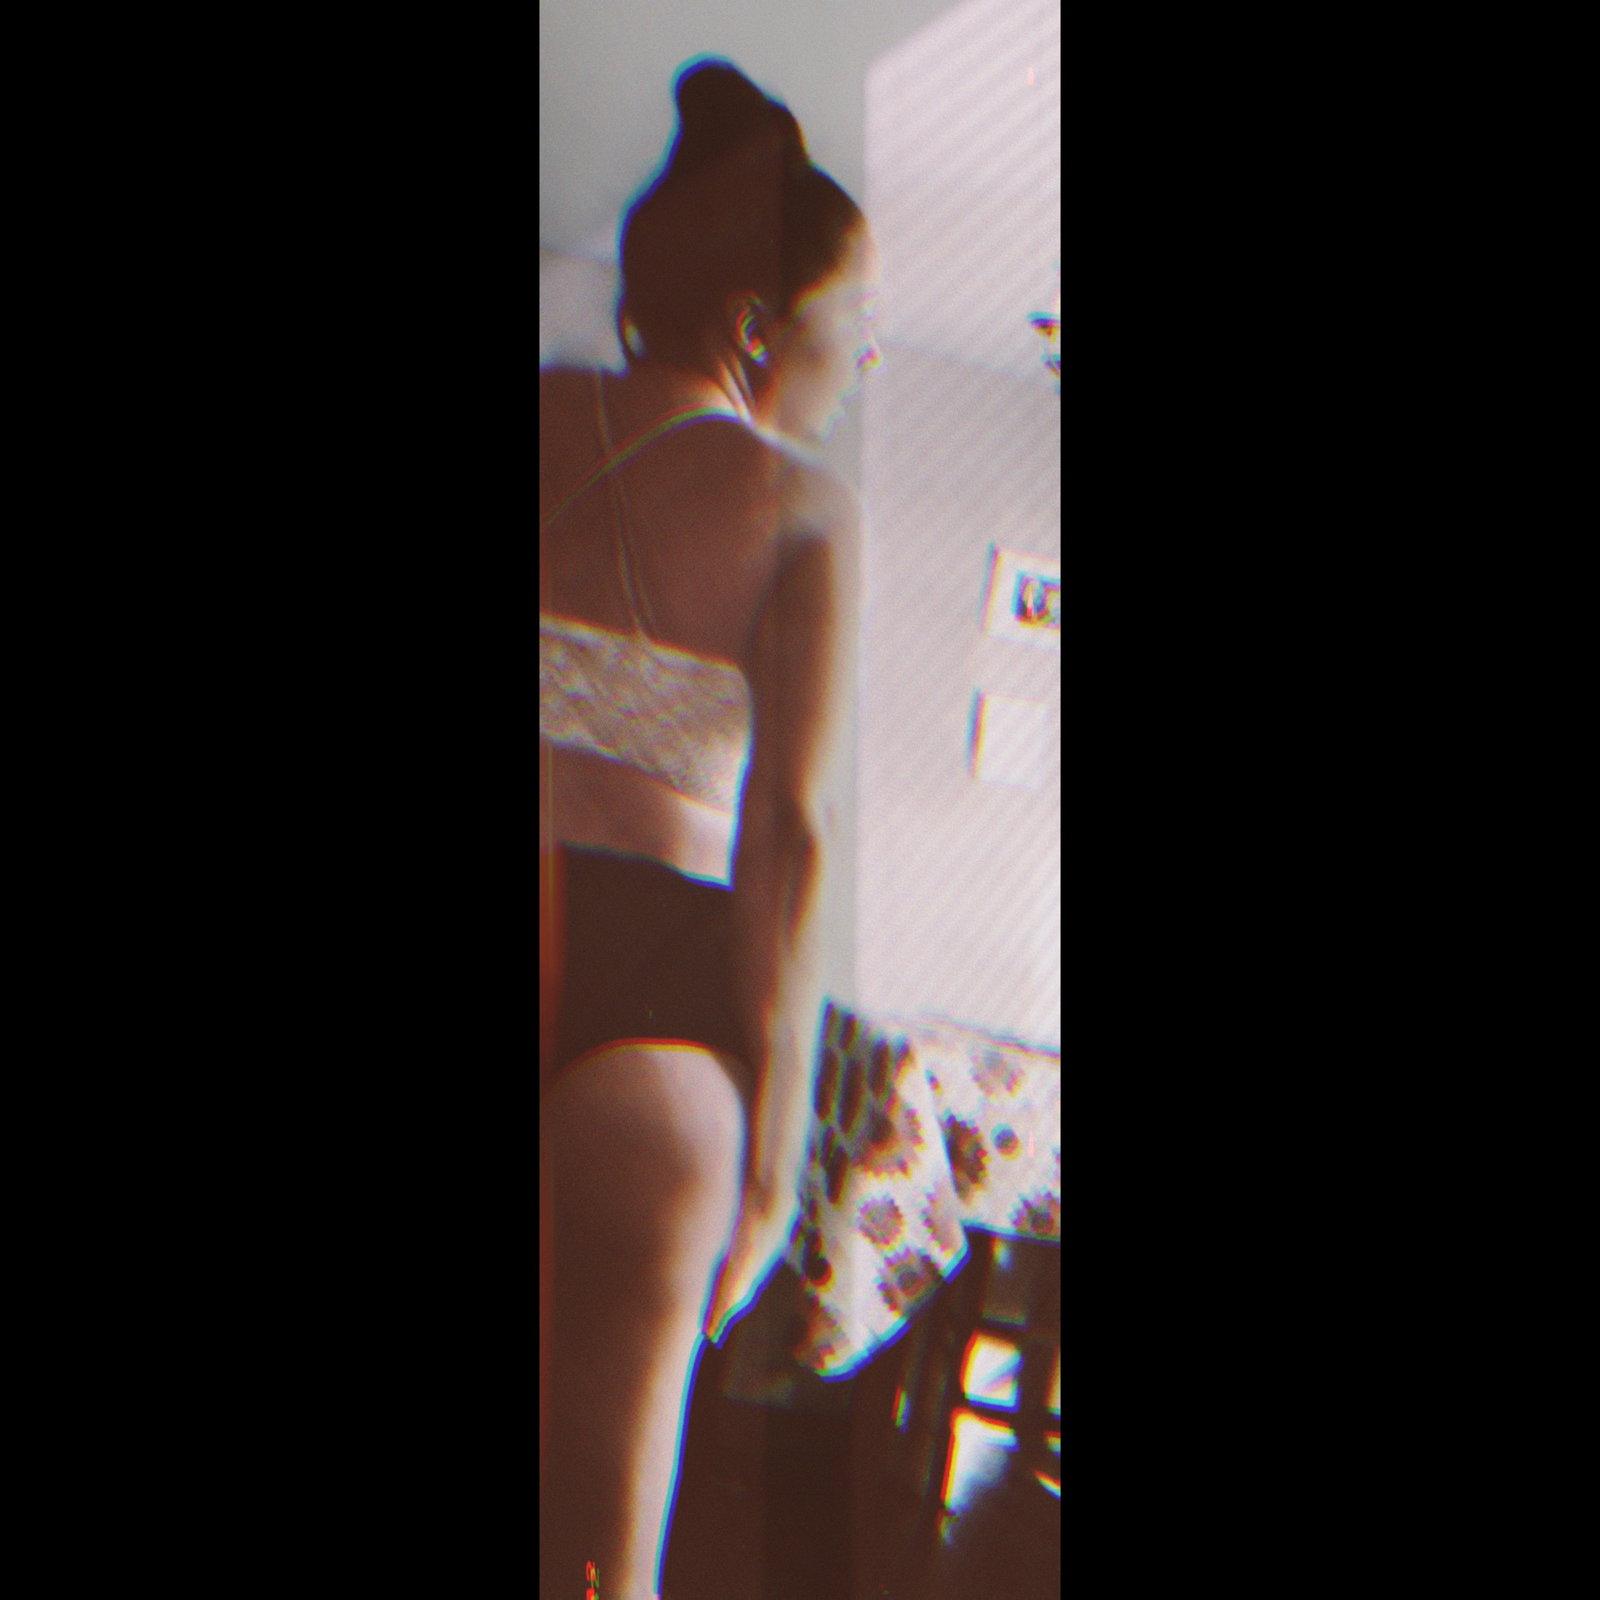 Watch the Photo by Misscassyyy with the username @Misscassyyy, who is a star user, posted on September 13, 2020. The post is about the topic Beauty of the Female Form. and the text says 'come check me out 😘🍑💋🔥'